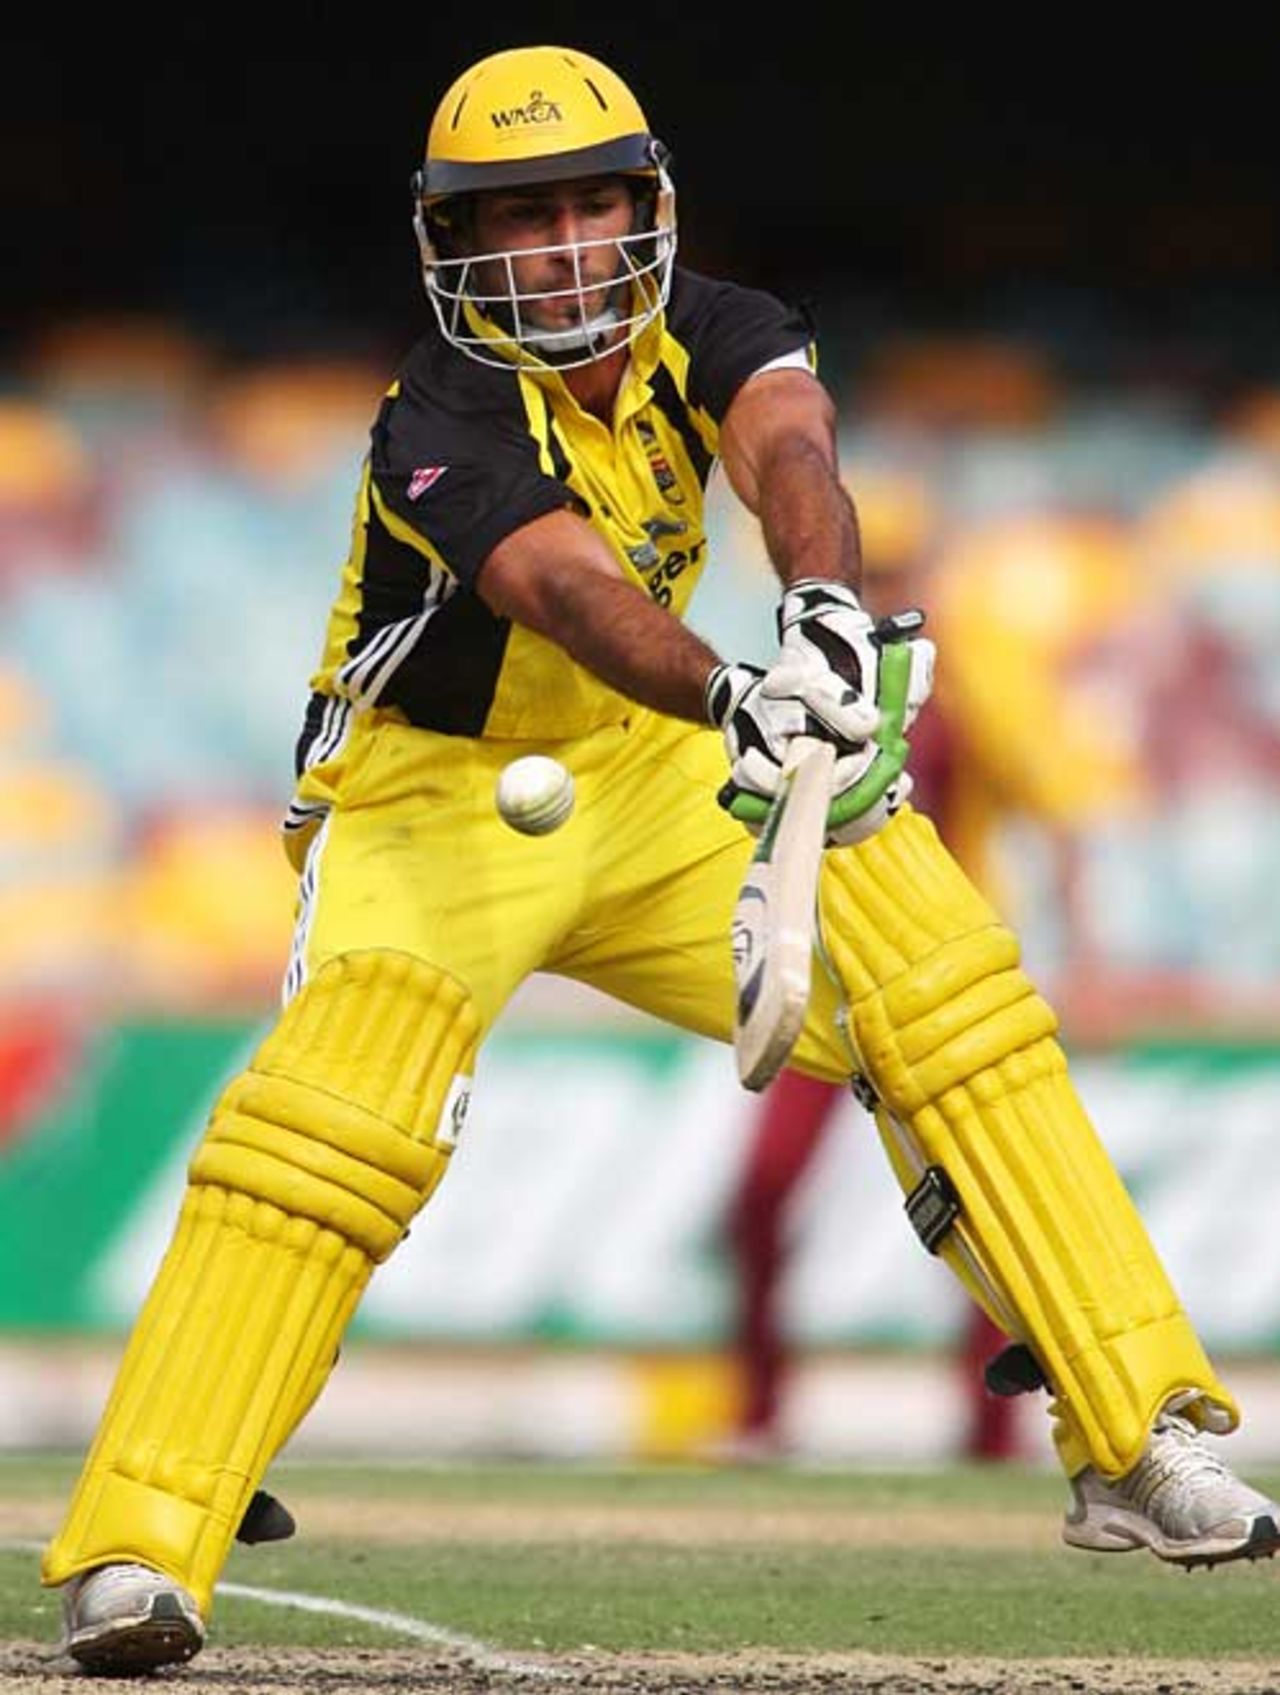 Theo Doropoulos's 75 led Western Australia to a match-winning total, Queensland v Western Australia, FR Cup, Brisbane, February 16, 2008